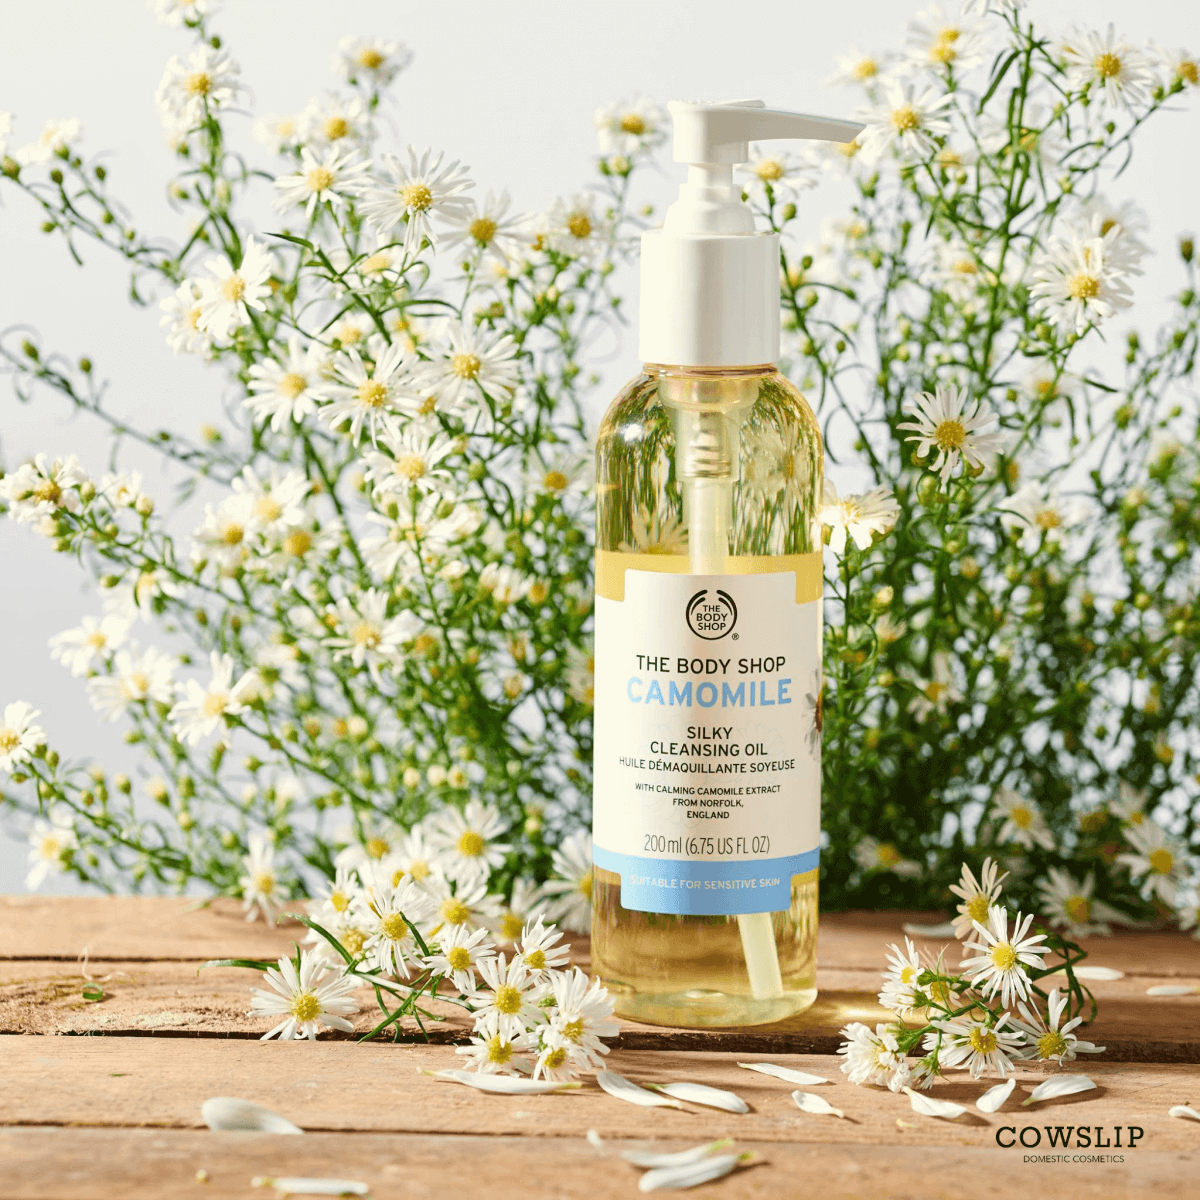 Dầu tẩy trang The Body Shop Camomile Silky Cleansing Oil